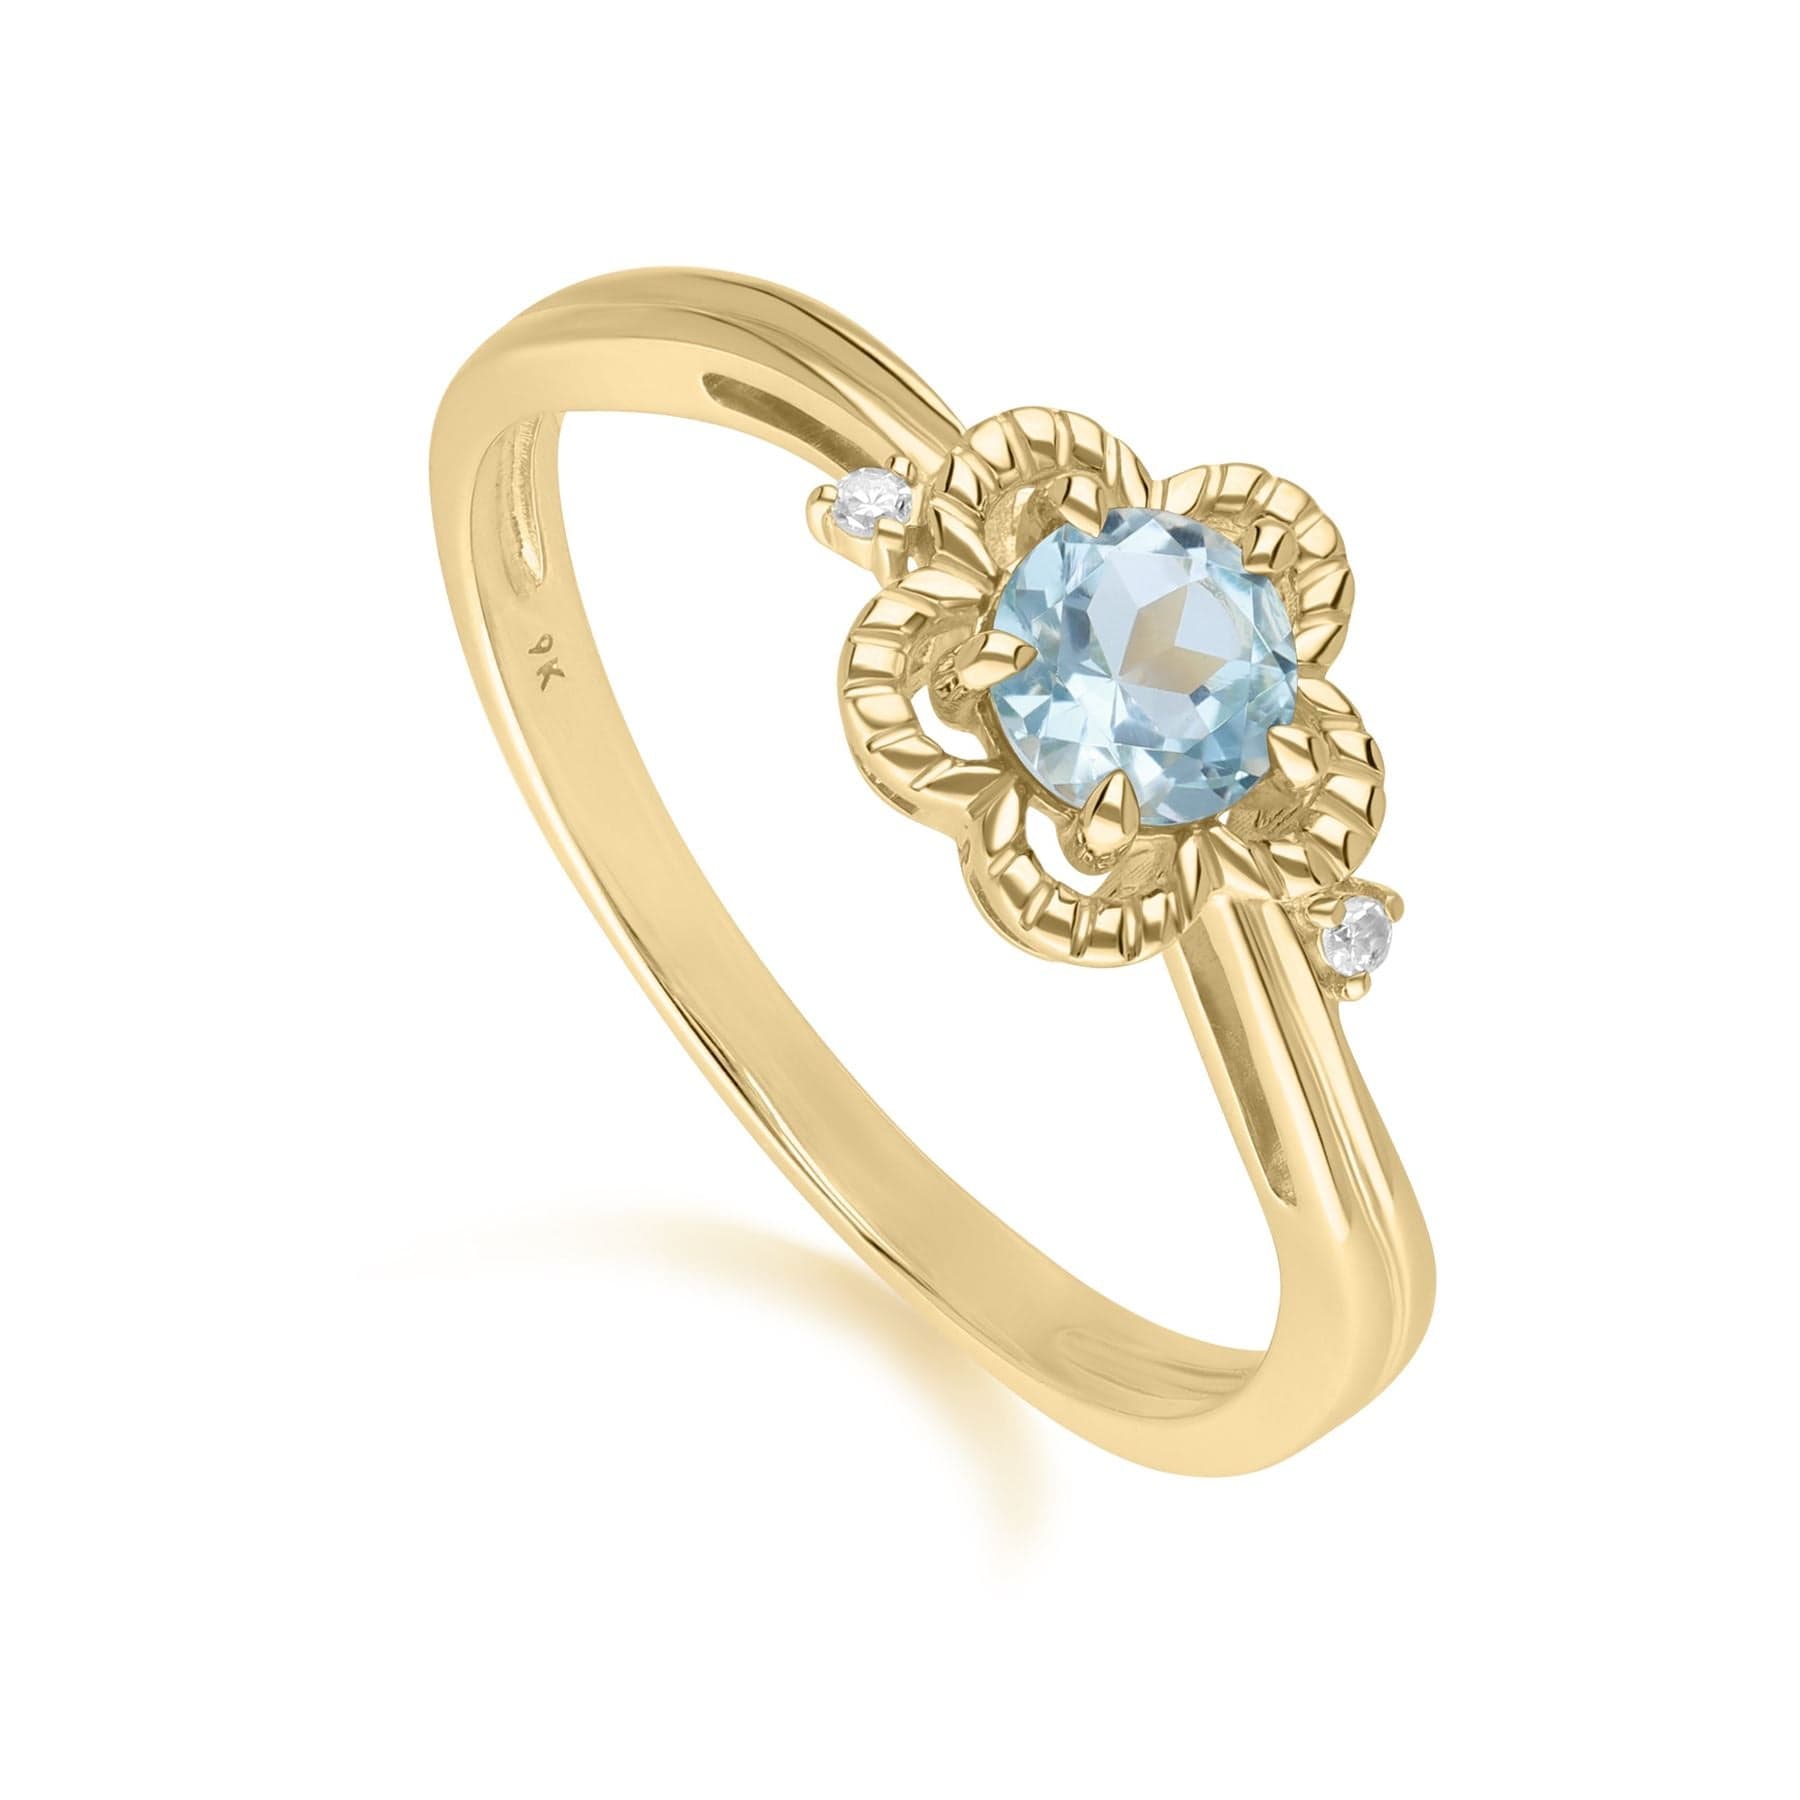 135R2049019 Floral Round Blue Topaz & Diamond Ring in 9ct Yellow Gold 1